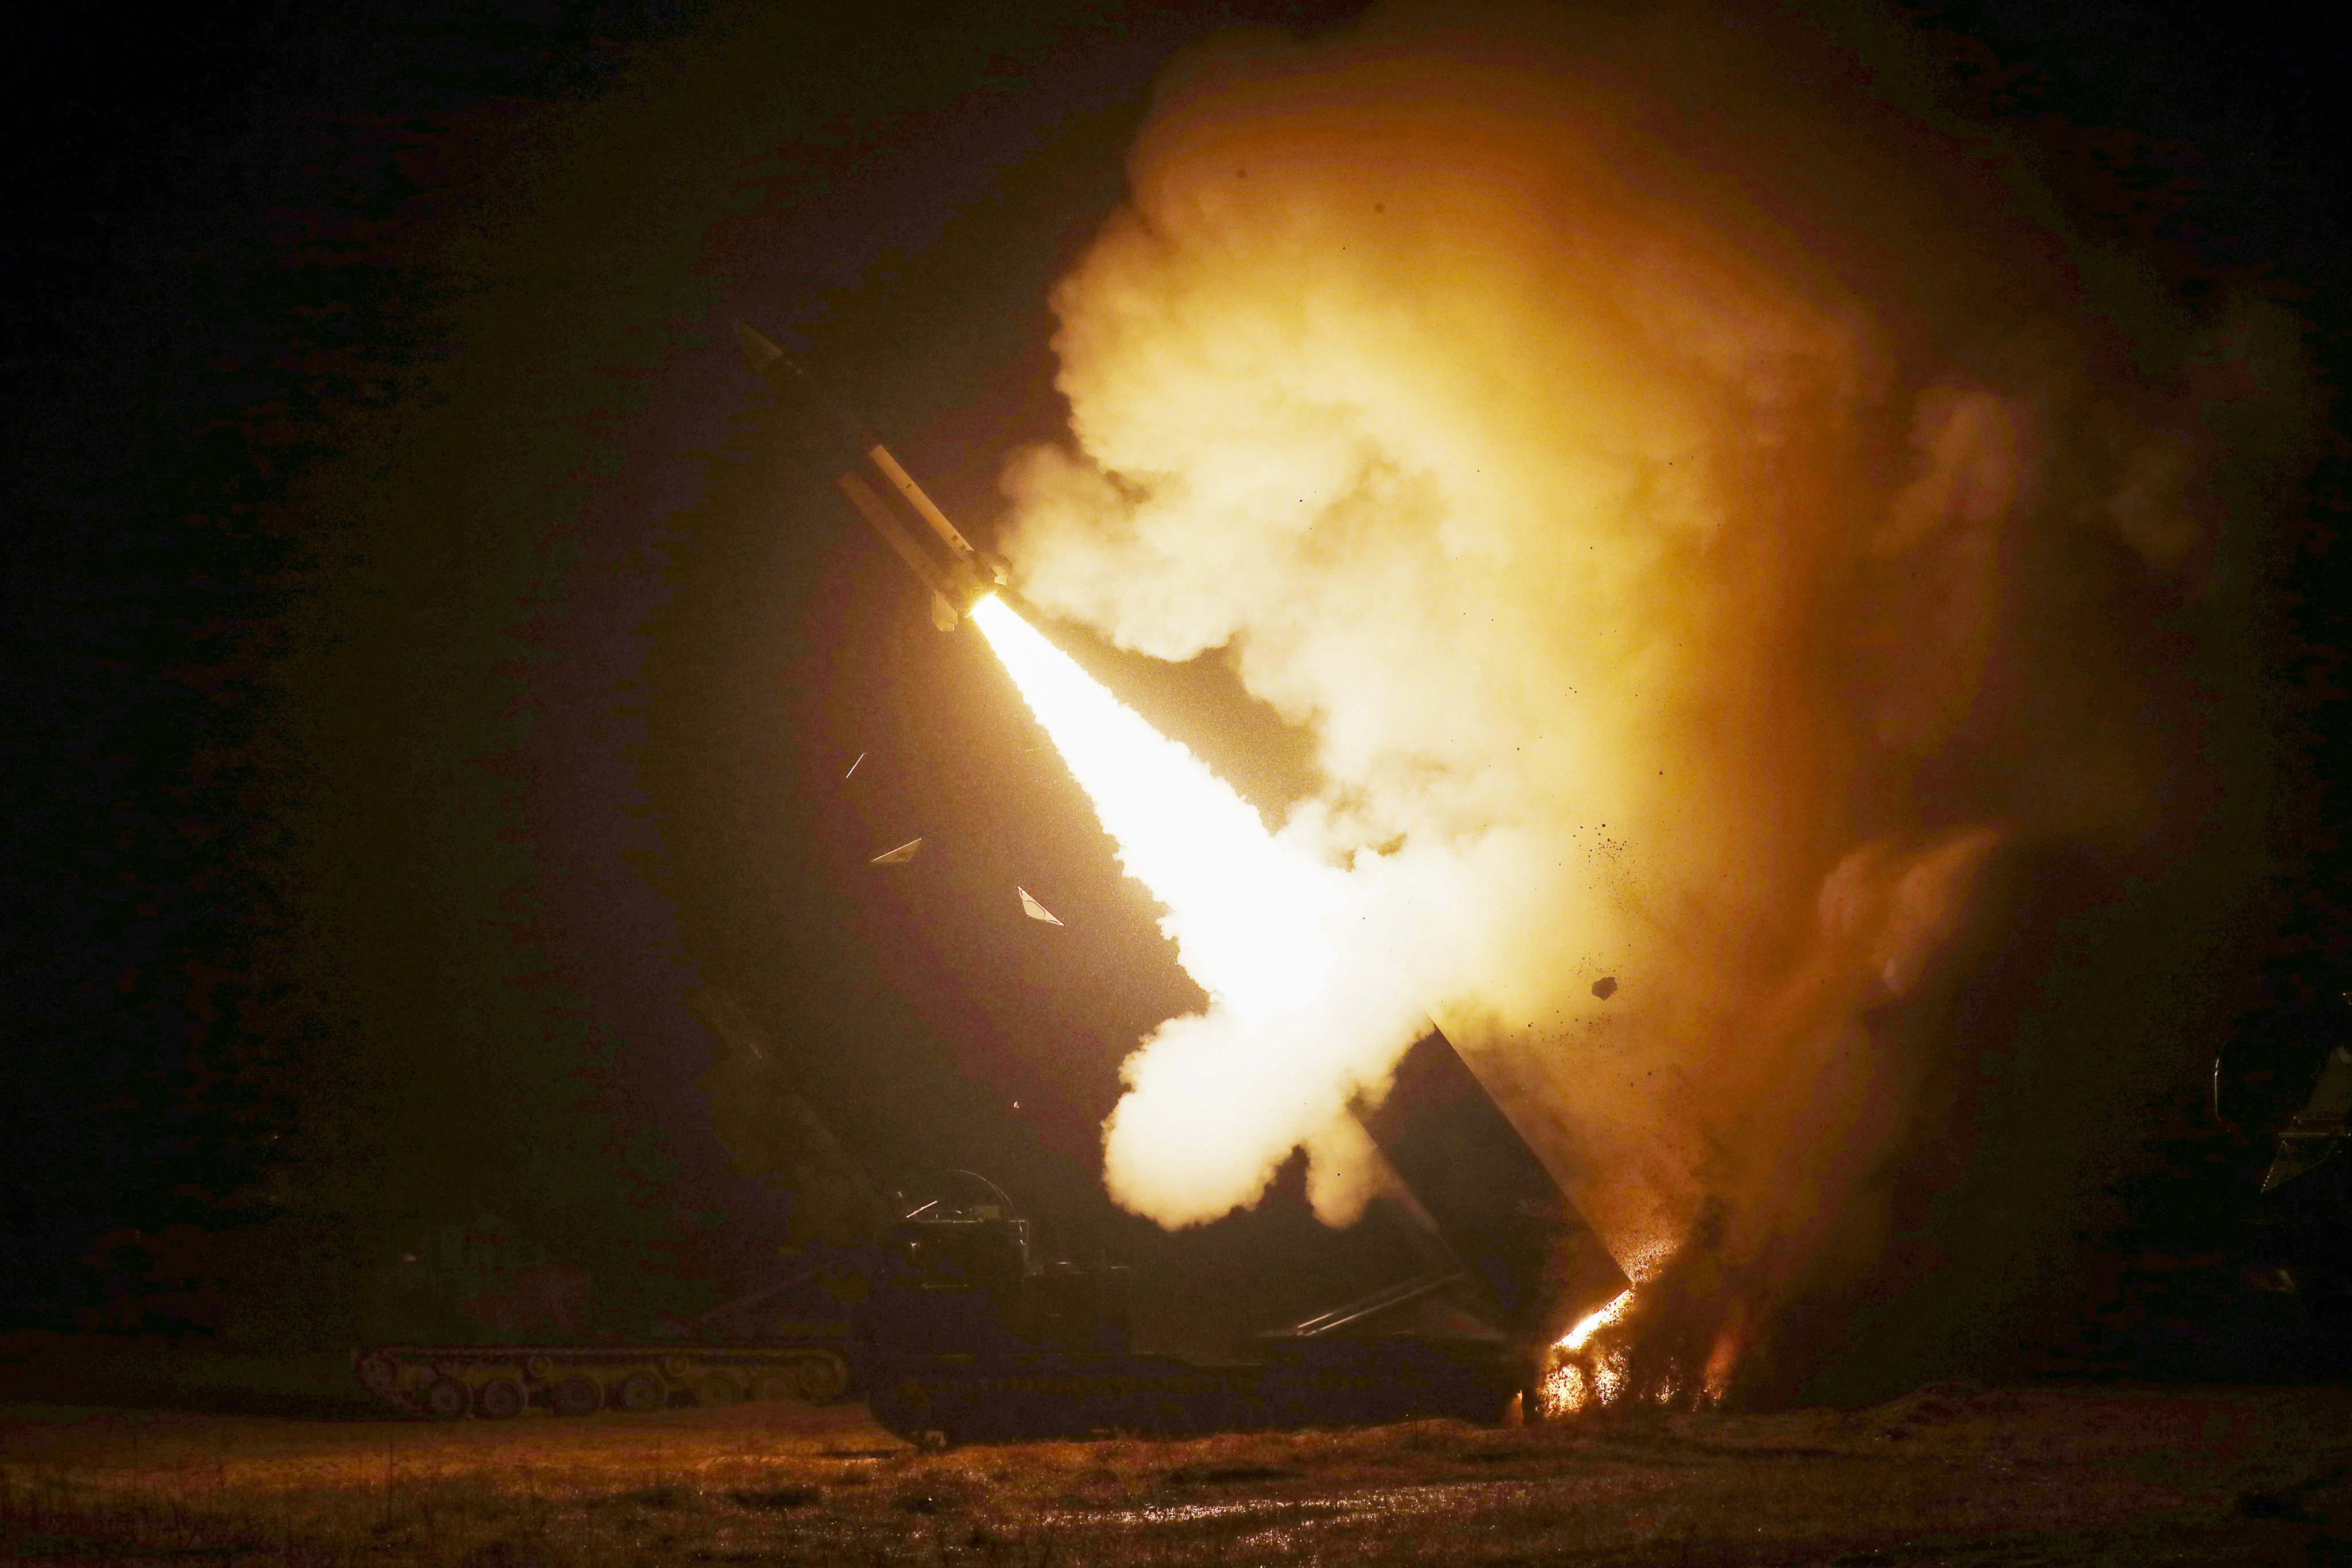 An ATACMS missile is fired during US-South Korea drills at an undisclosed location in South Korea in October 2022. Photo: South Korea Defence Ministry via AP